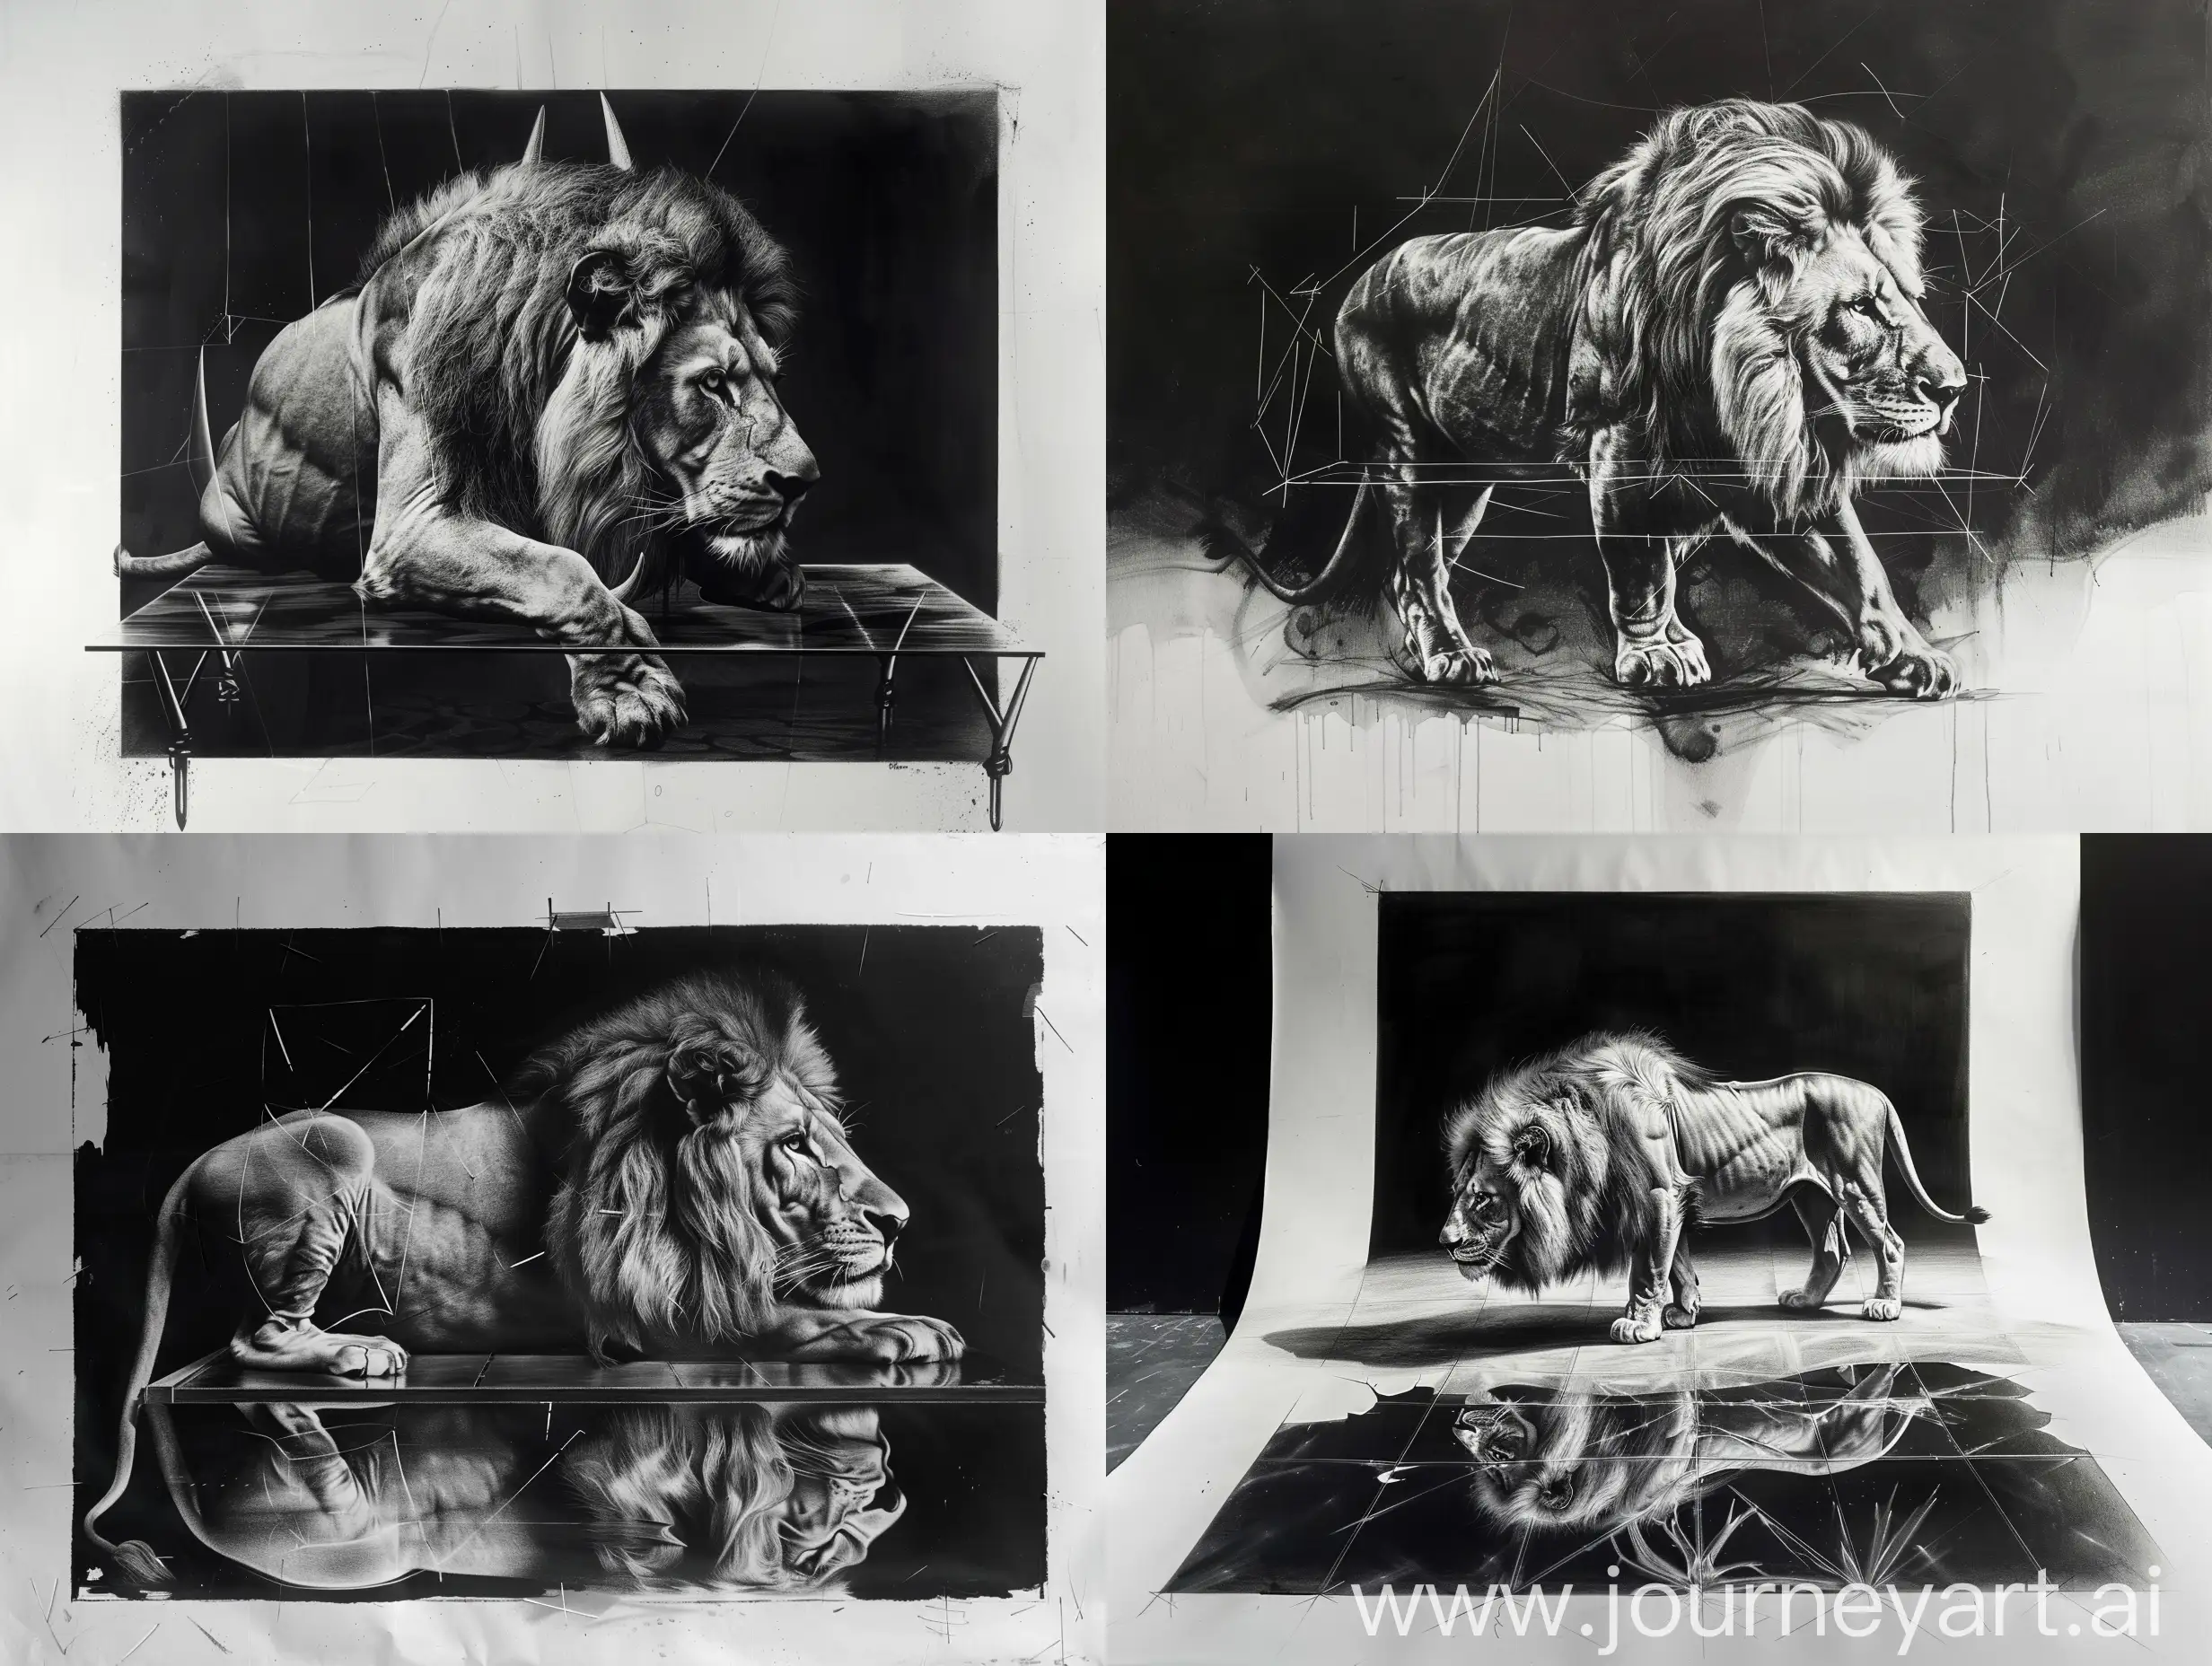 creative dark hyper realistic pencil sketch of a lion on a glass surface on a large canvas in great details with dark background